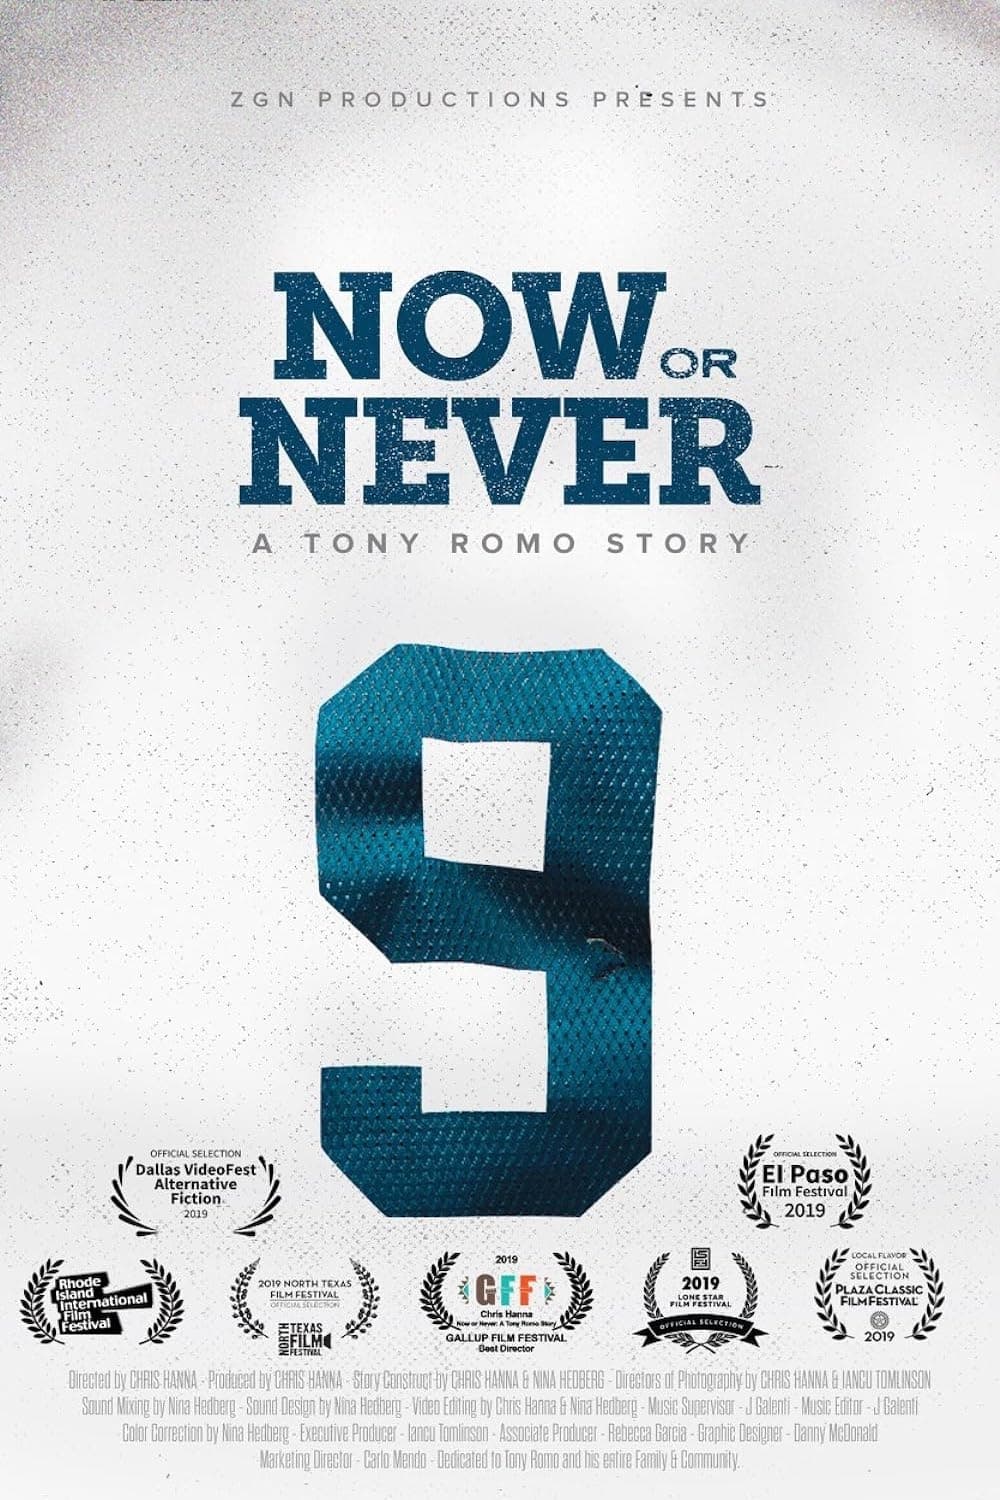 Now or Never: A Tony Romo Story